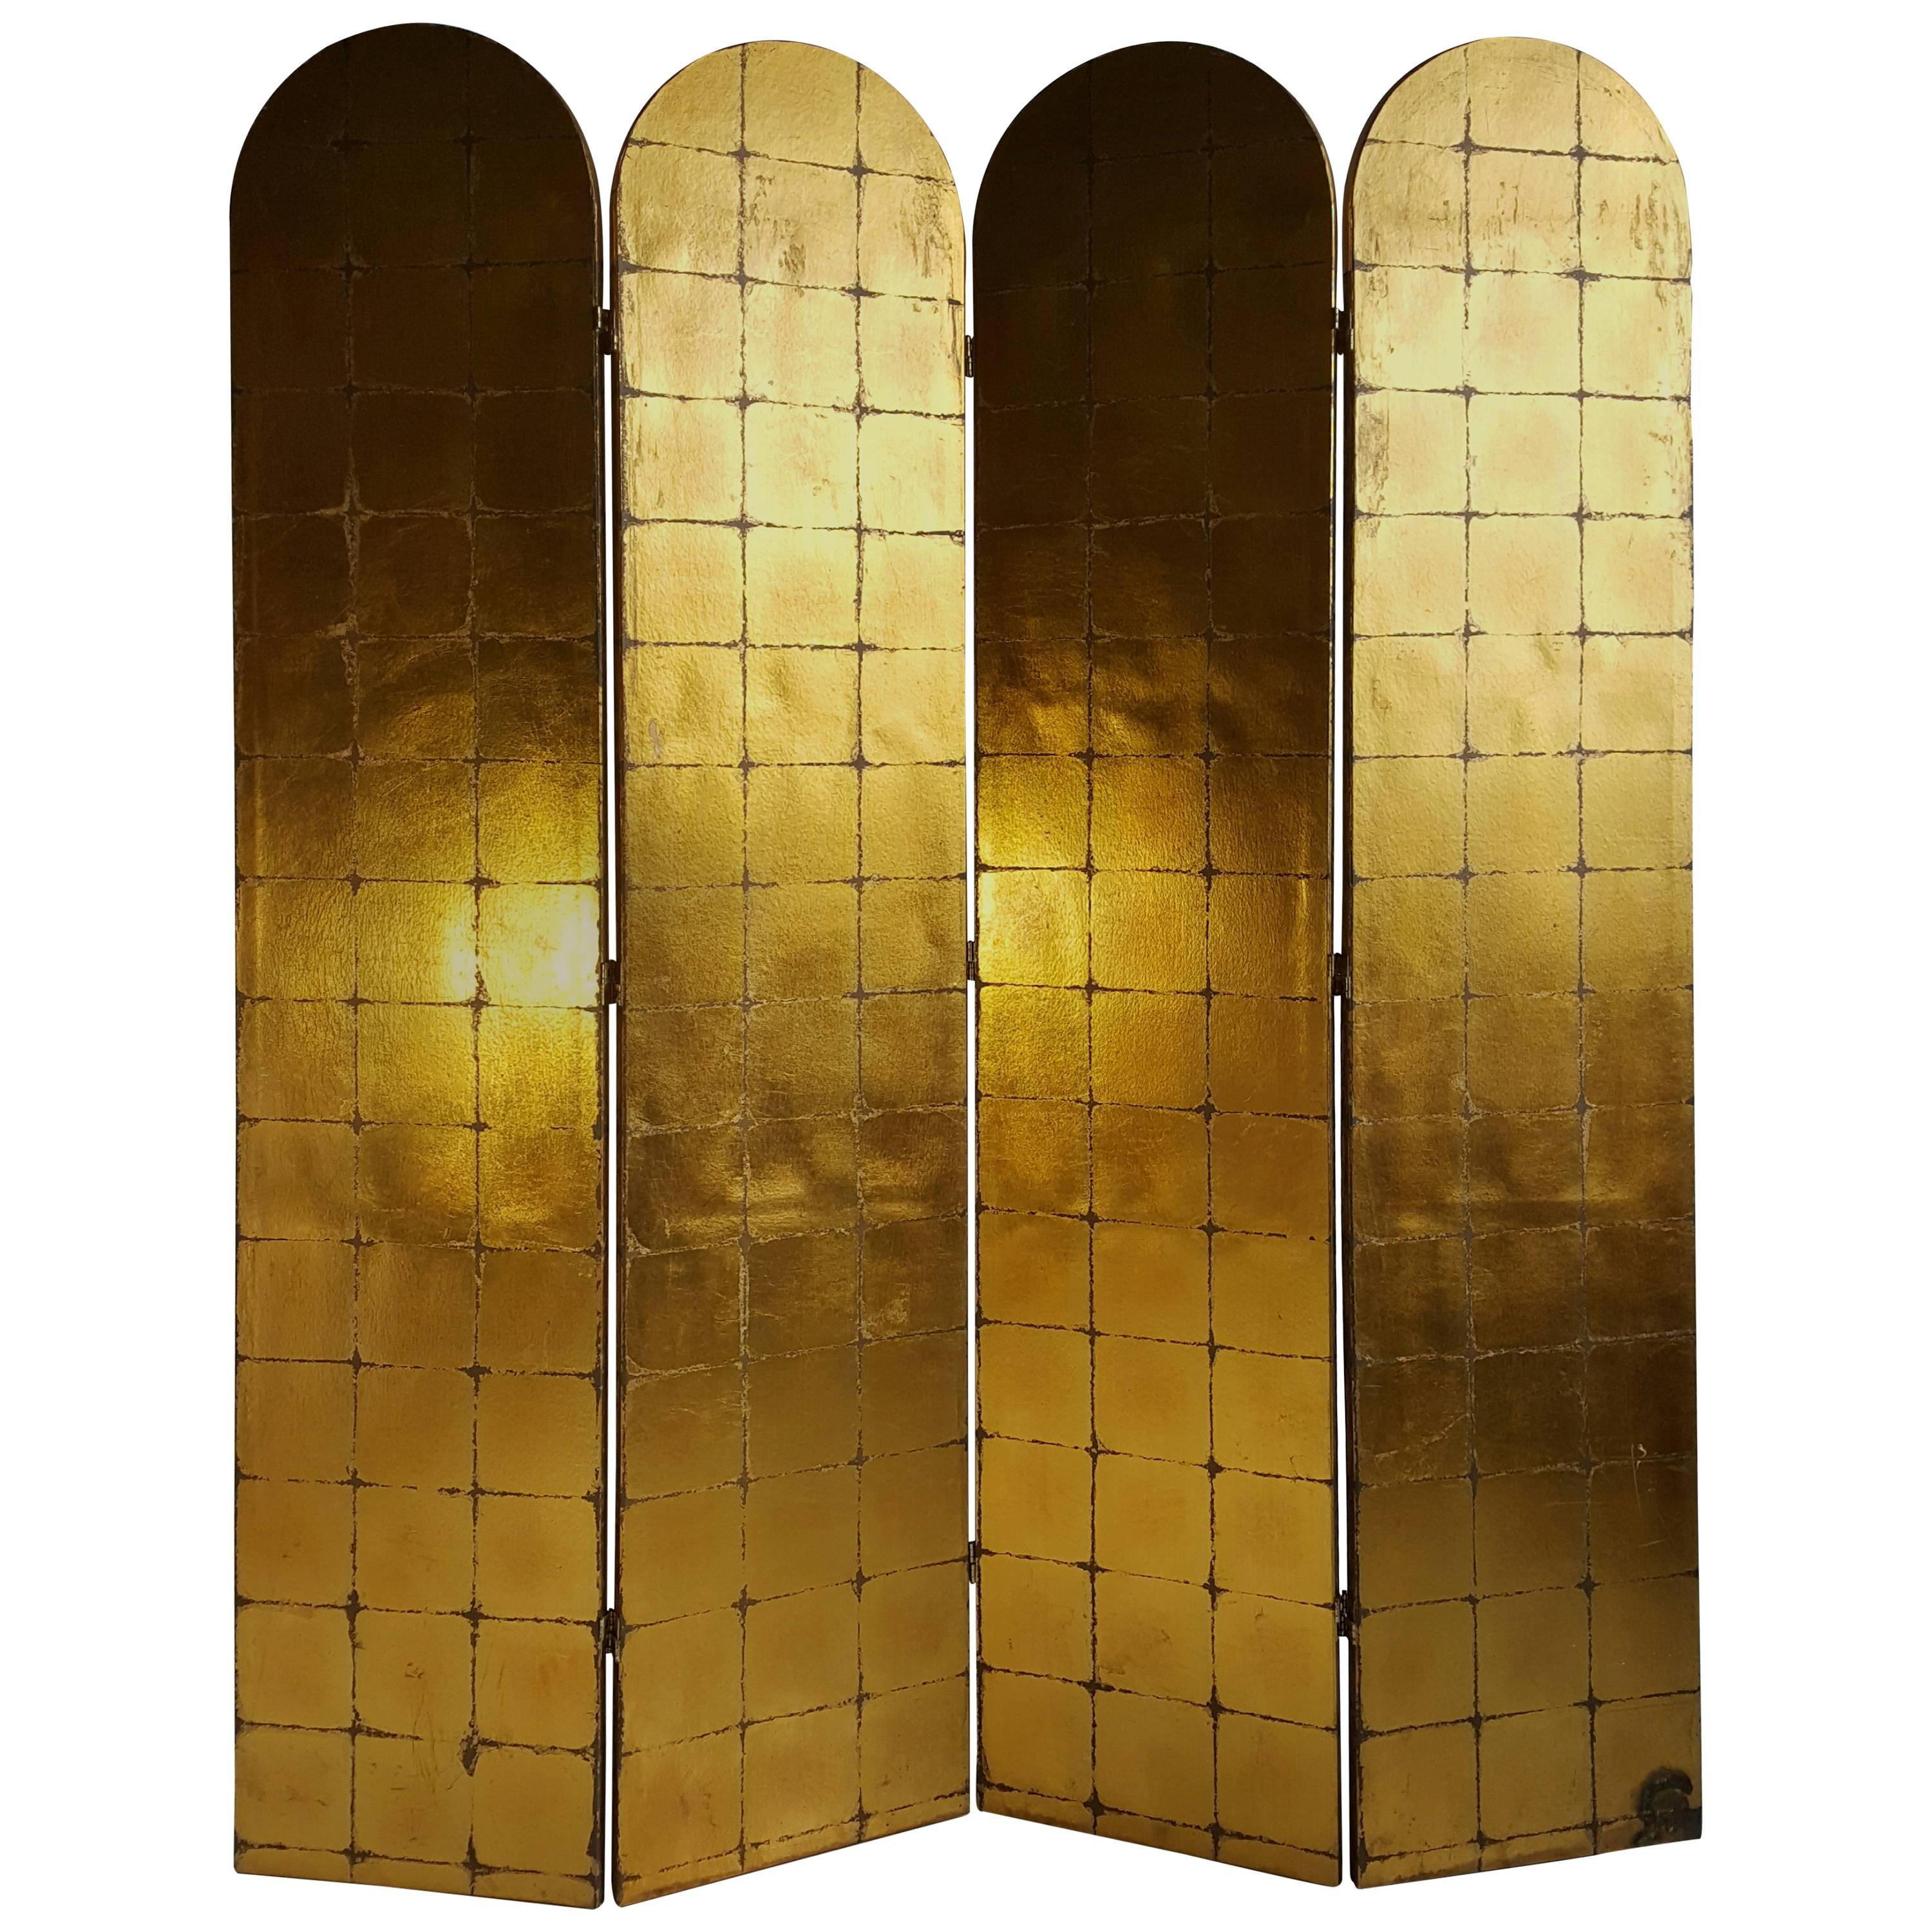 Highly Decorated Four-Panel Folding Screen /Divider, Gold Leaf, Made in Italy